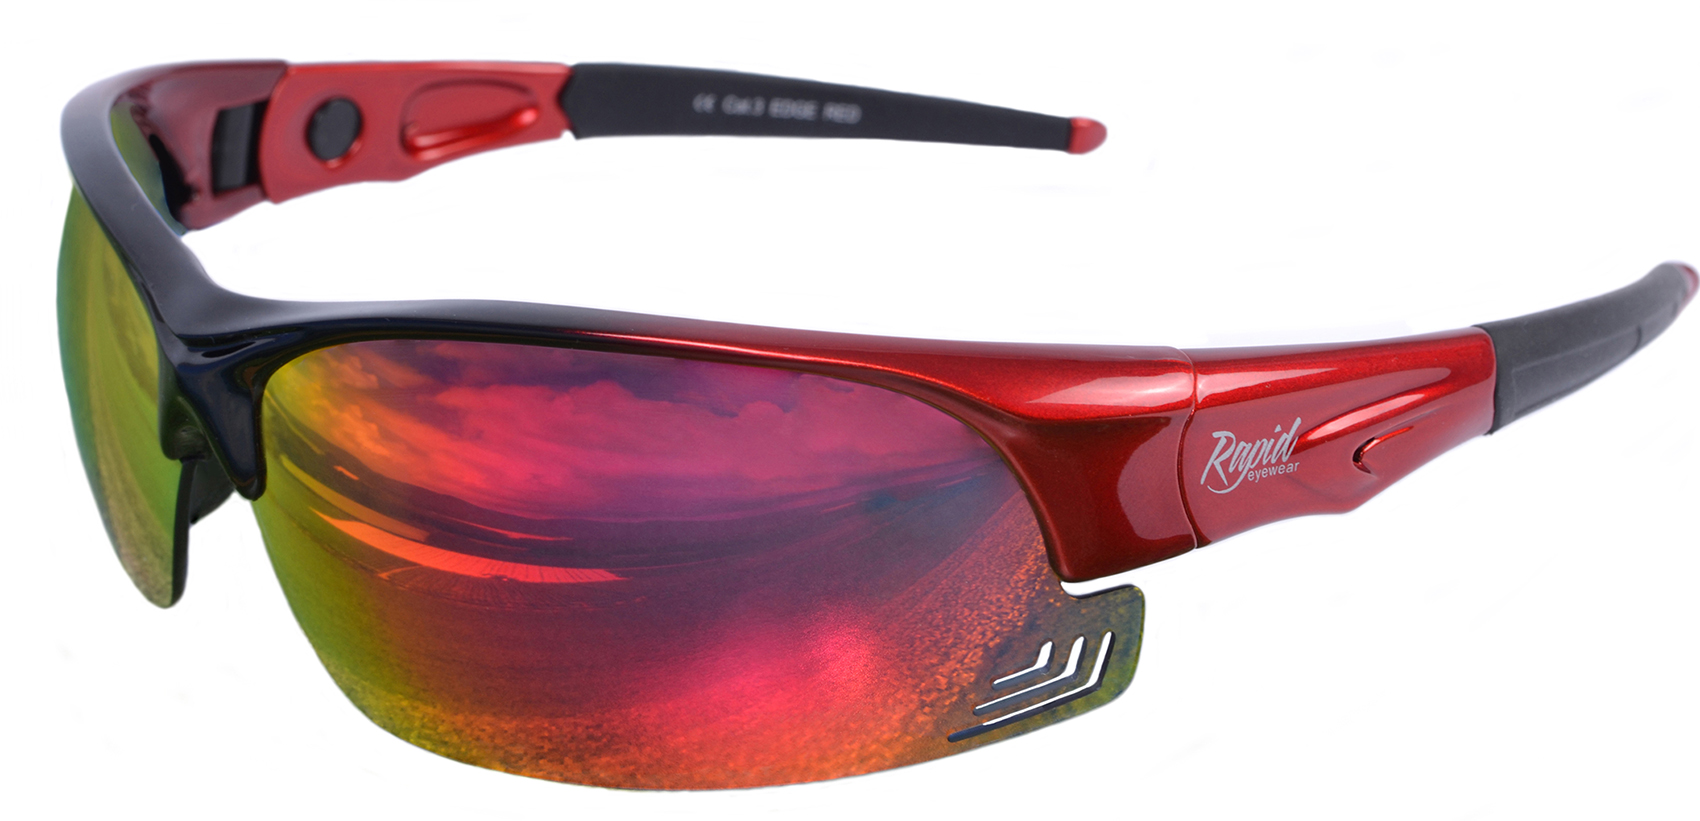 women's cycling glasses with interchangeable lenses